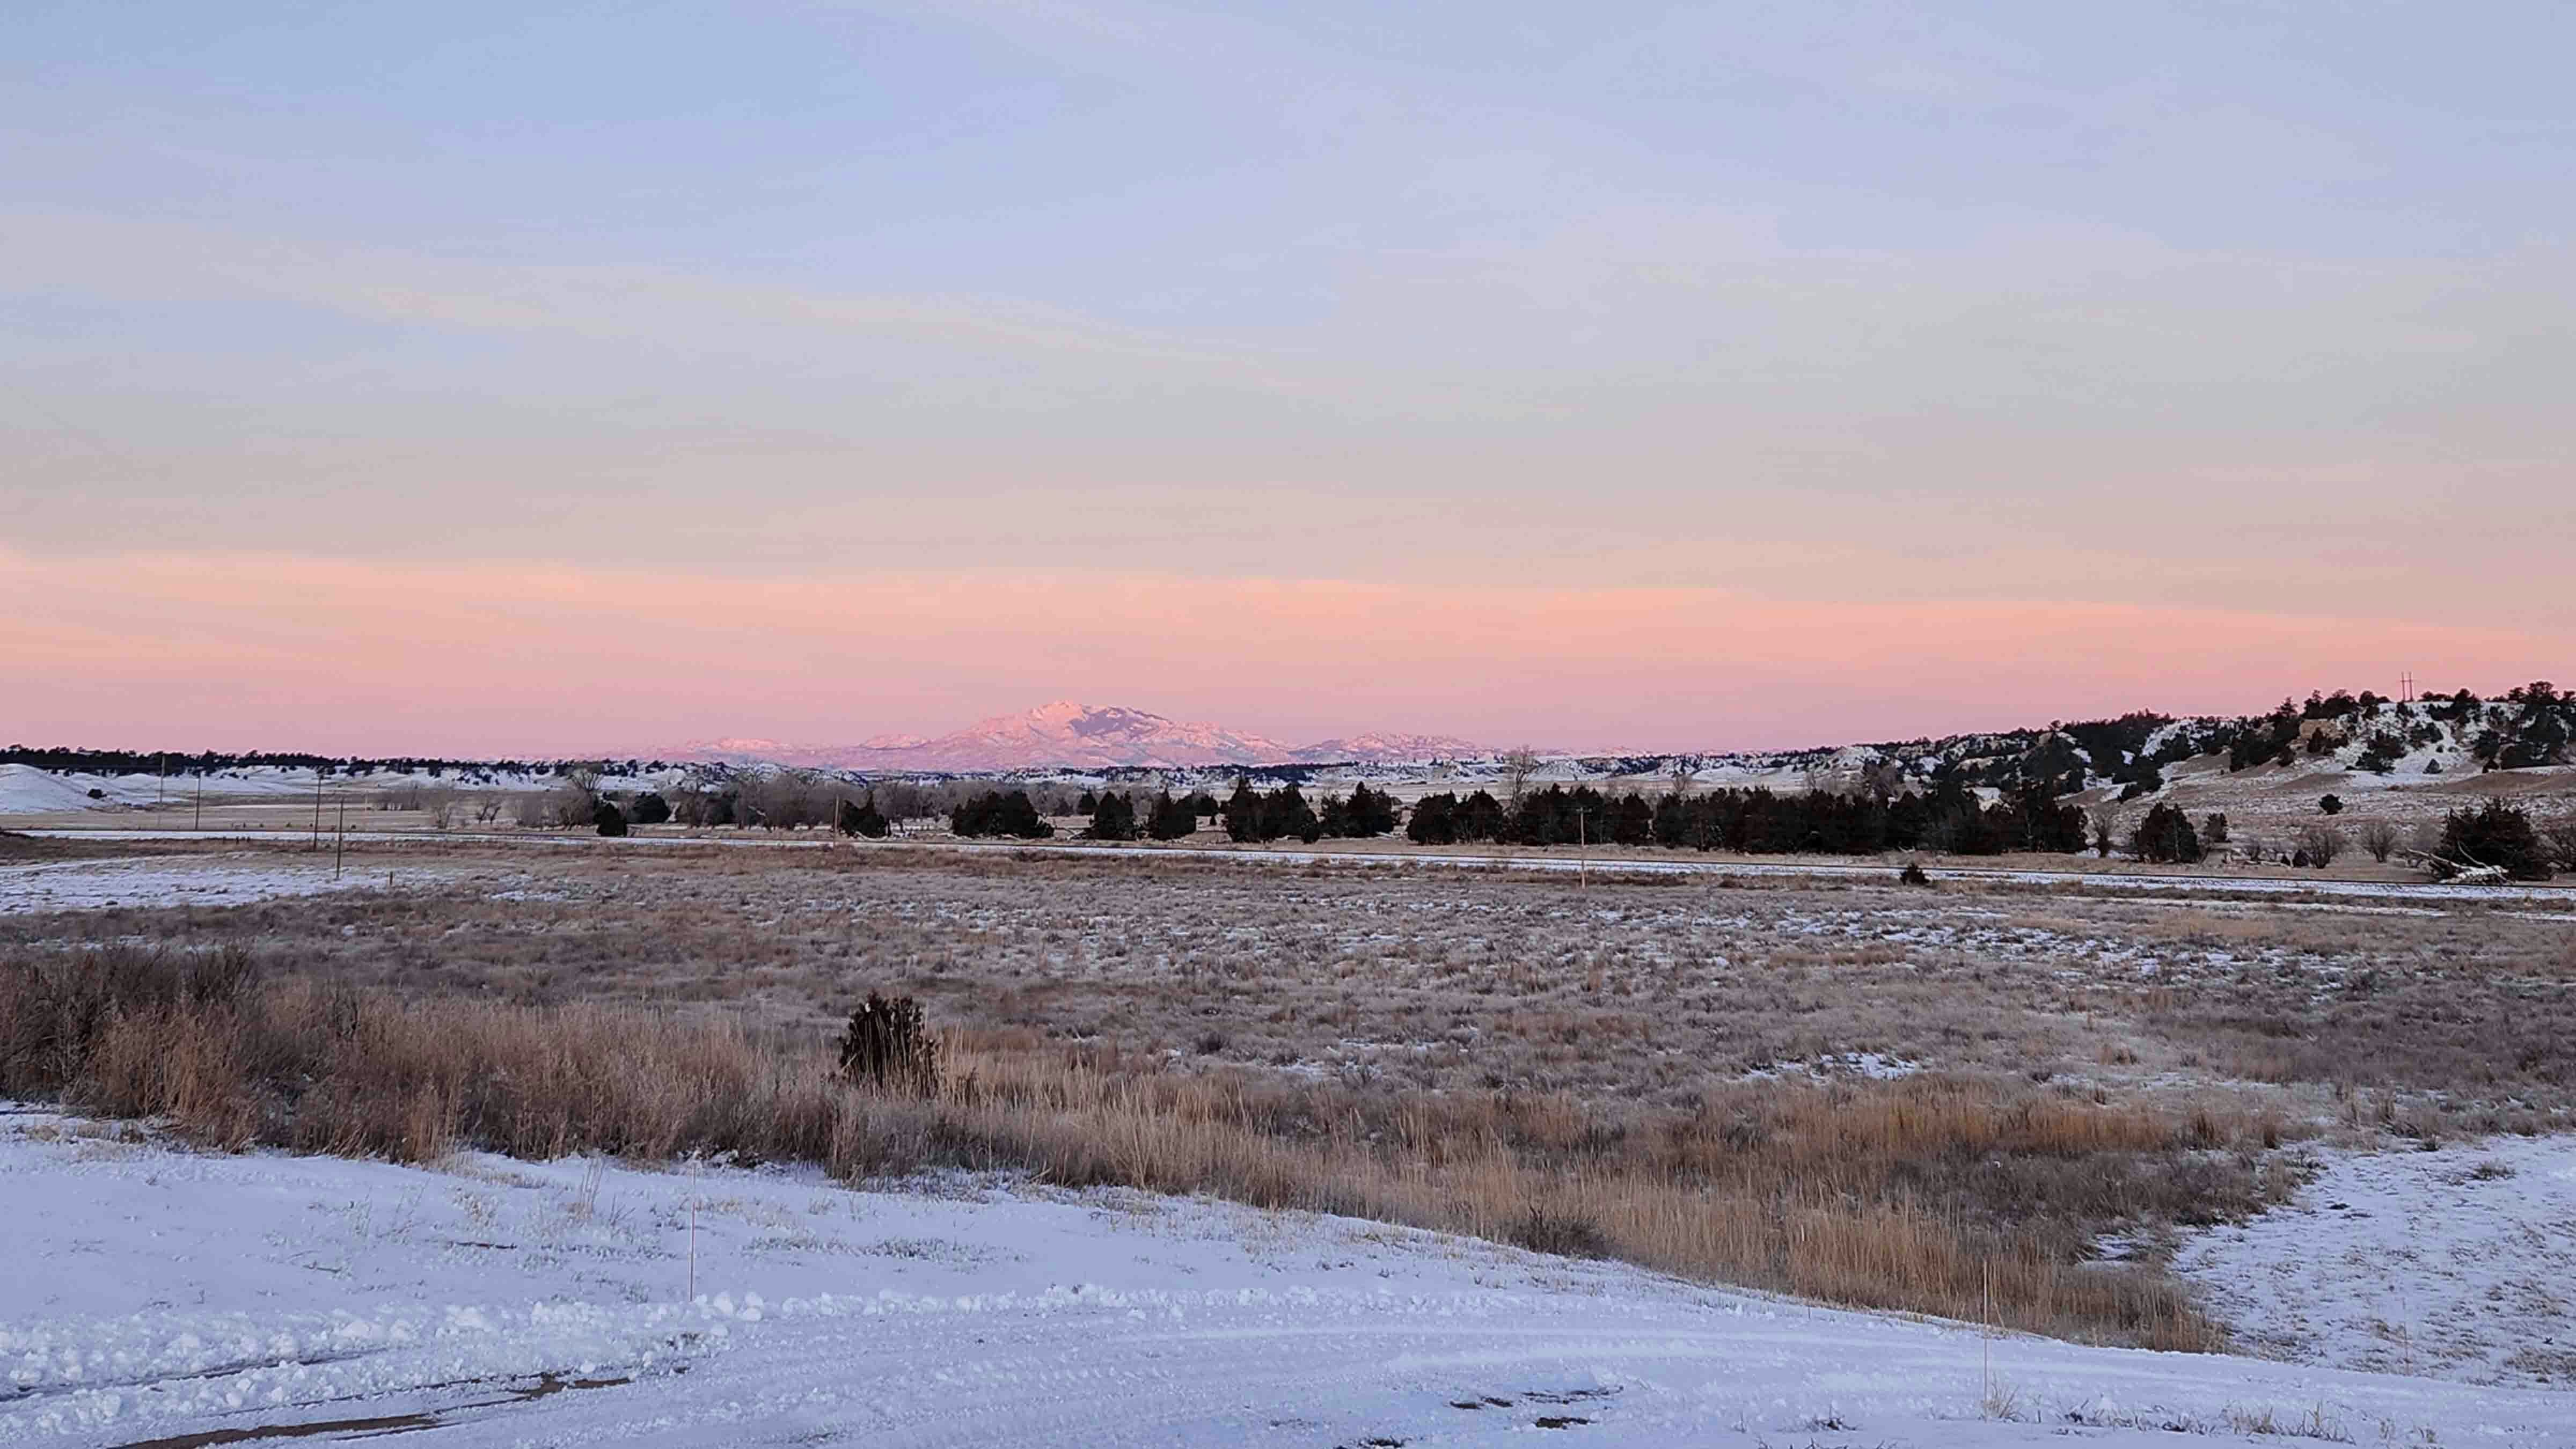 "Guernsey sunrise with Laramie Peak from outside of my home."